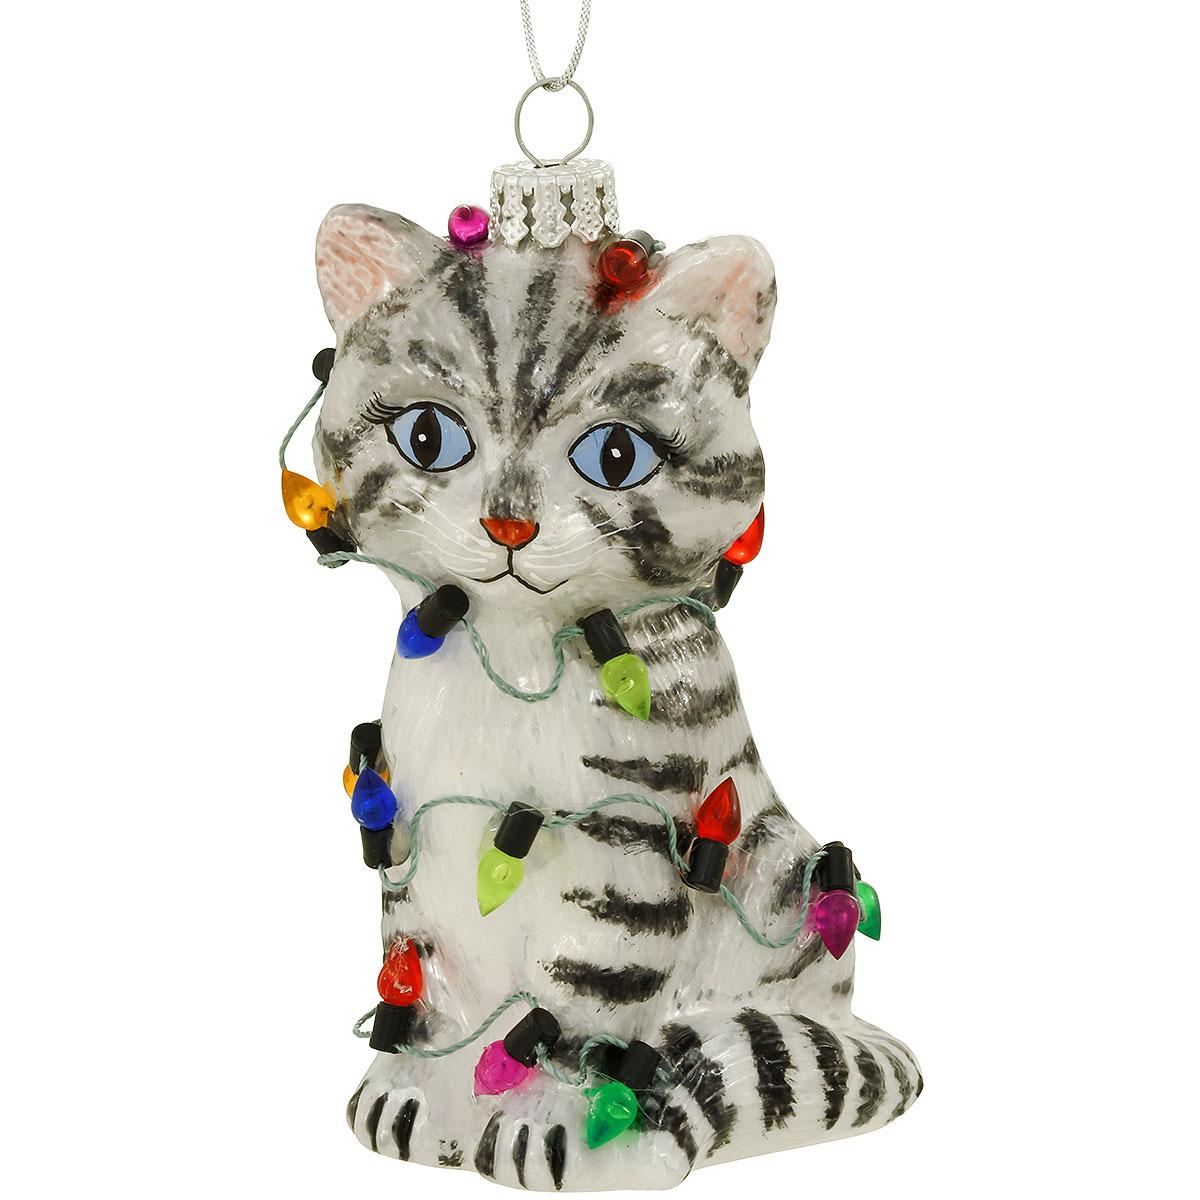 Grey tabby cat wrapped in lights glass ornament